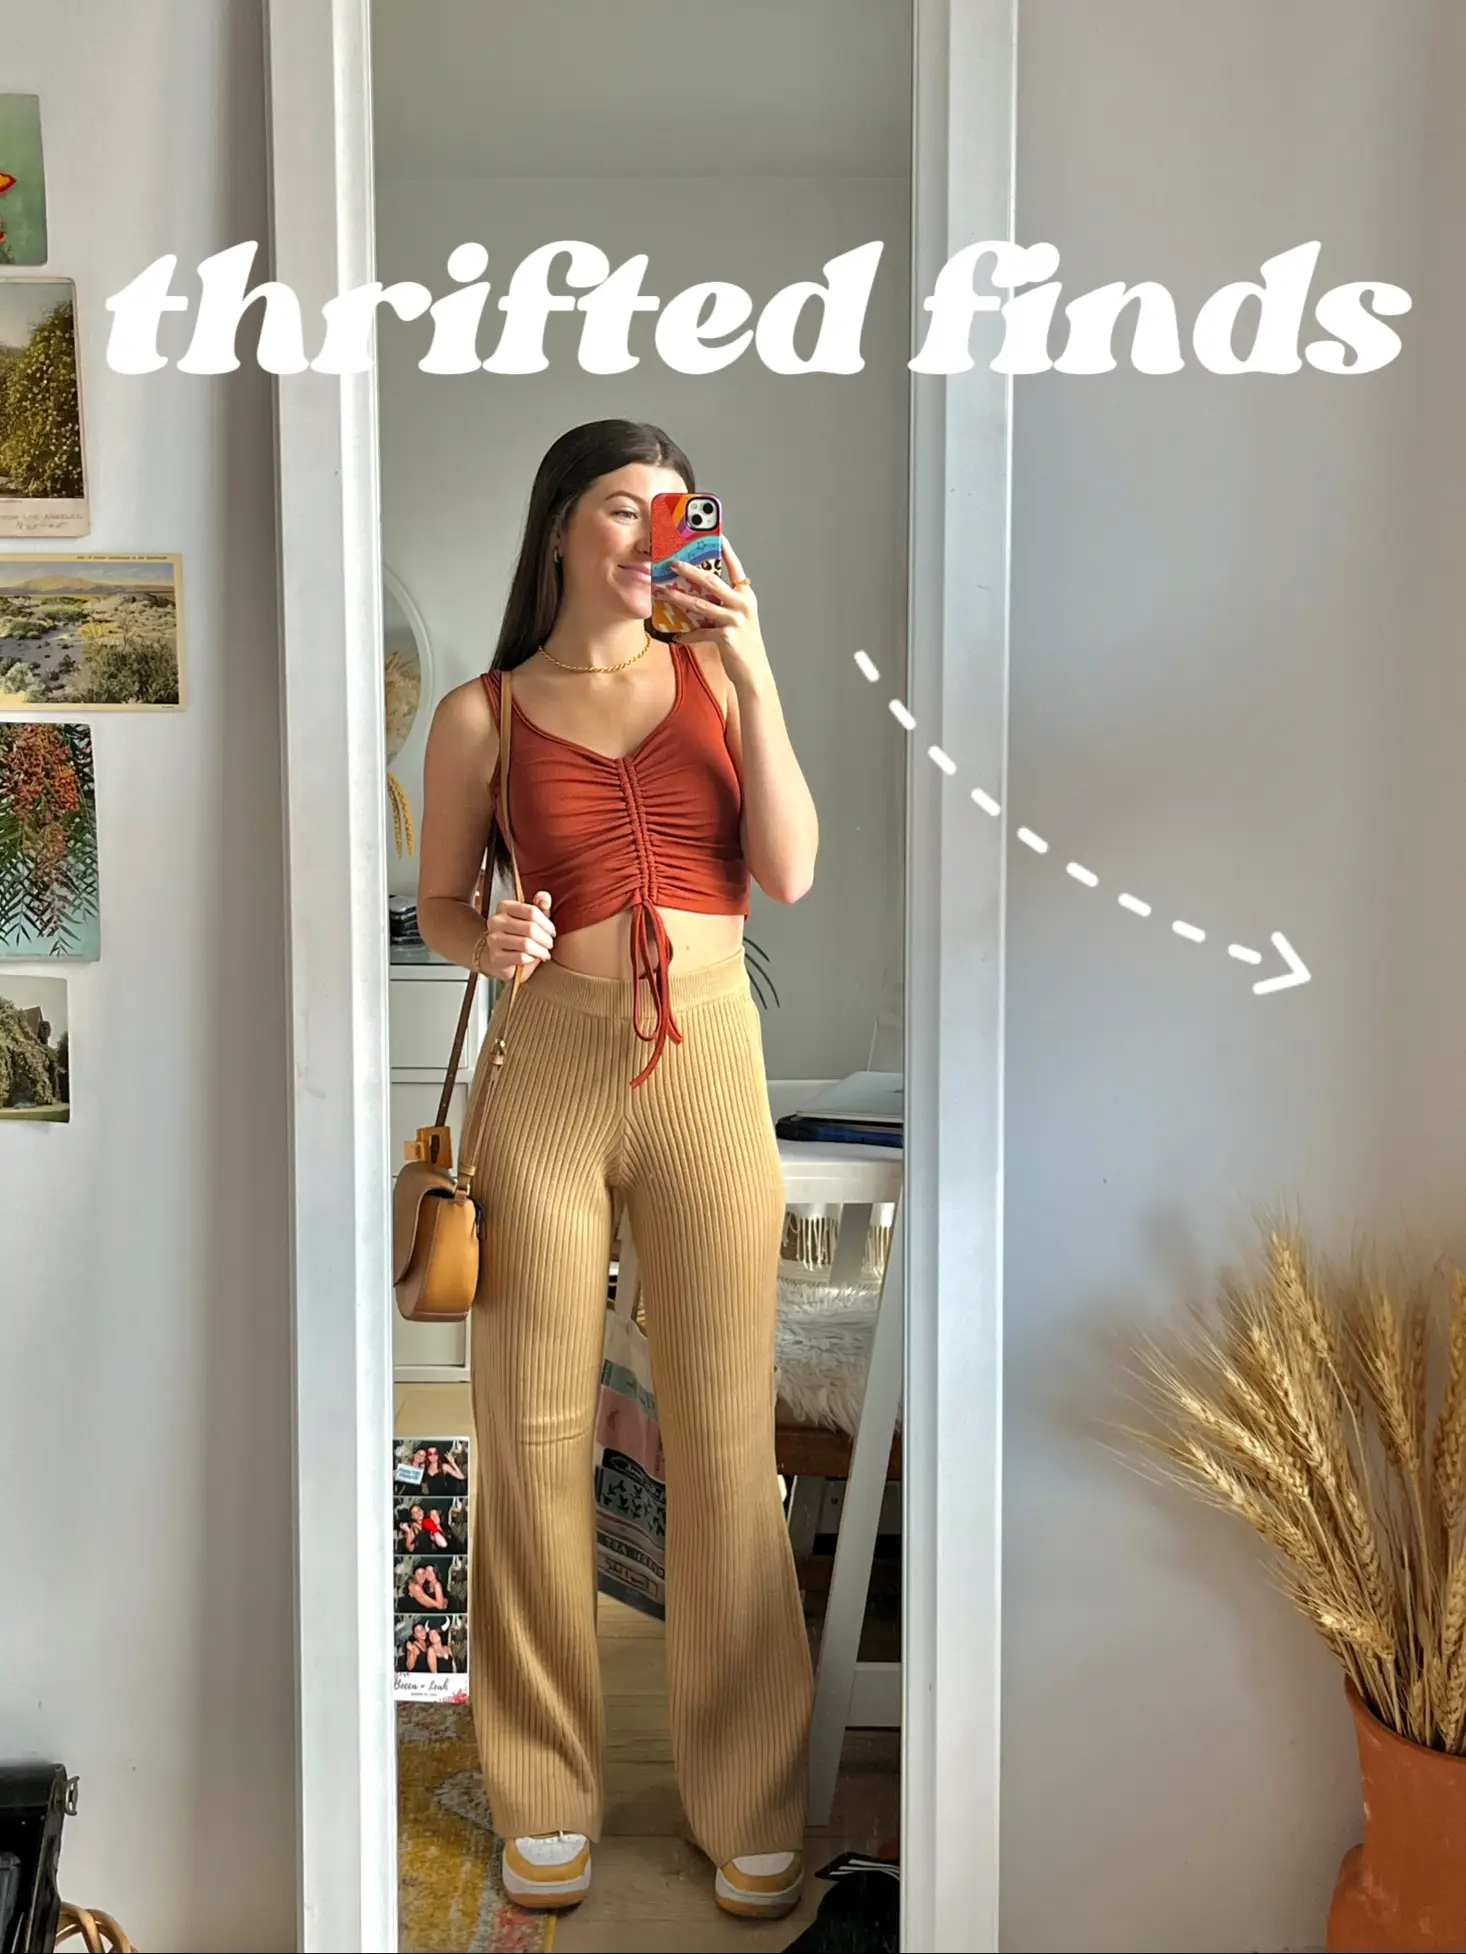  A woman in a red top and blue pants is taking a selfie in a mirror.